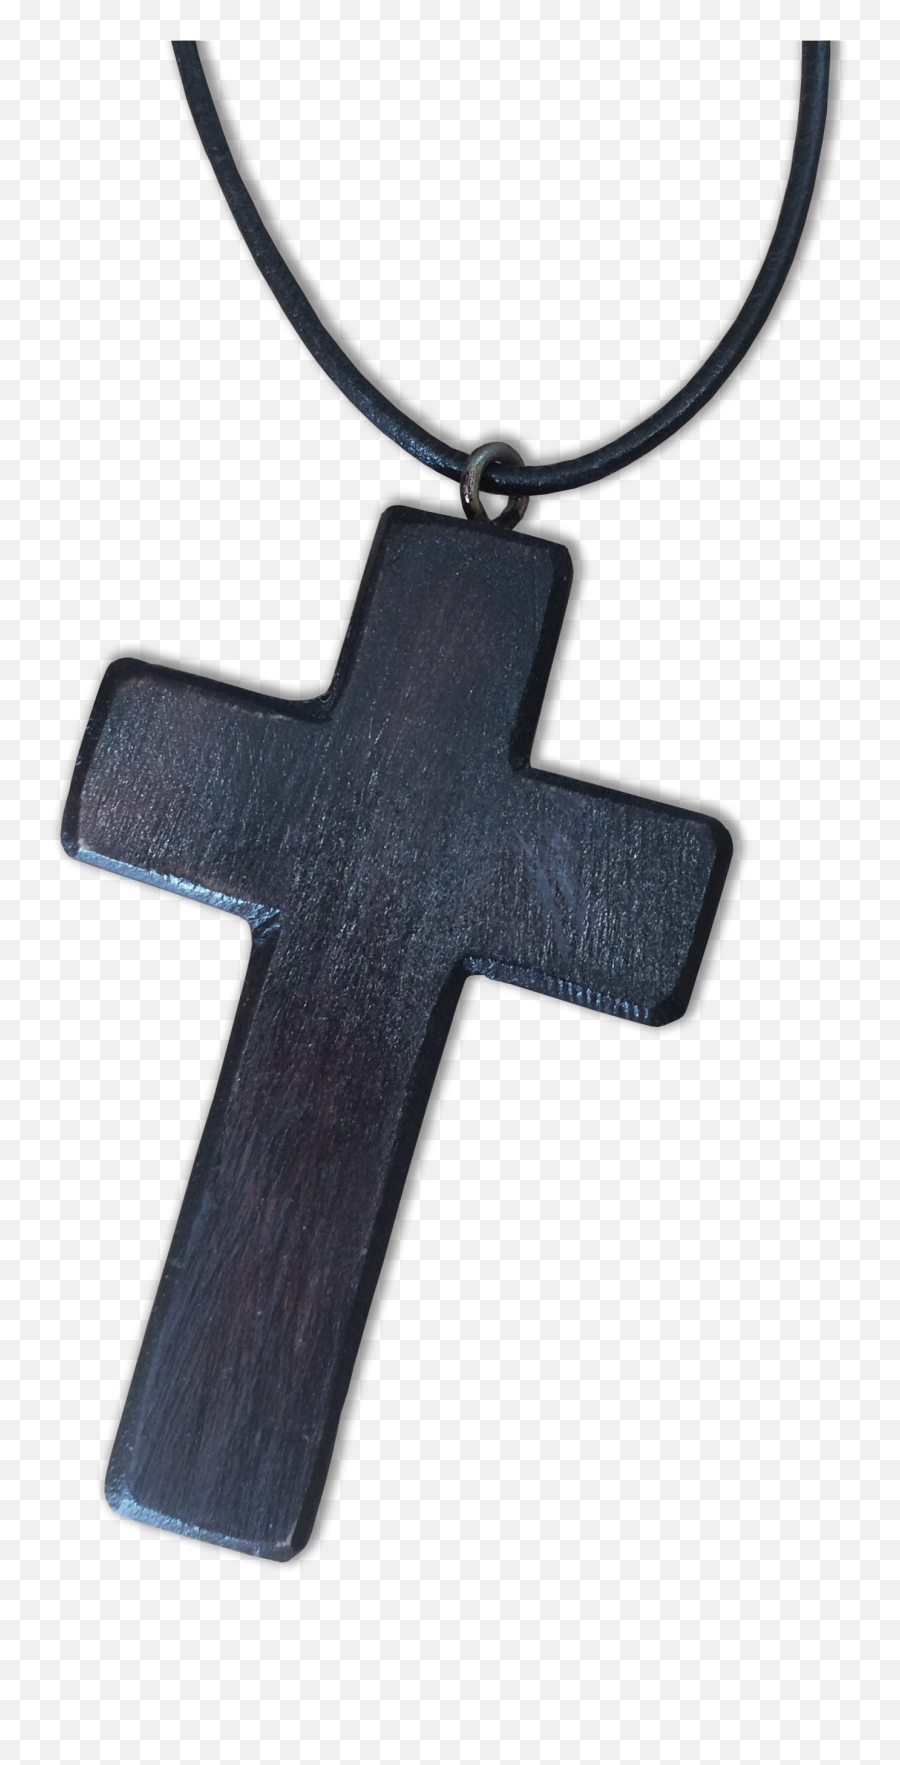 Wooden Cross Png - Portable Network Graphics,Wooden Cross Png